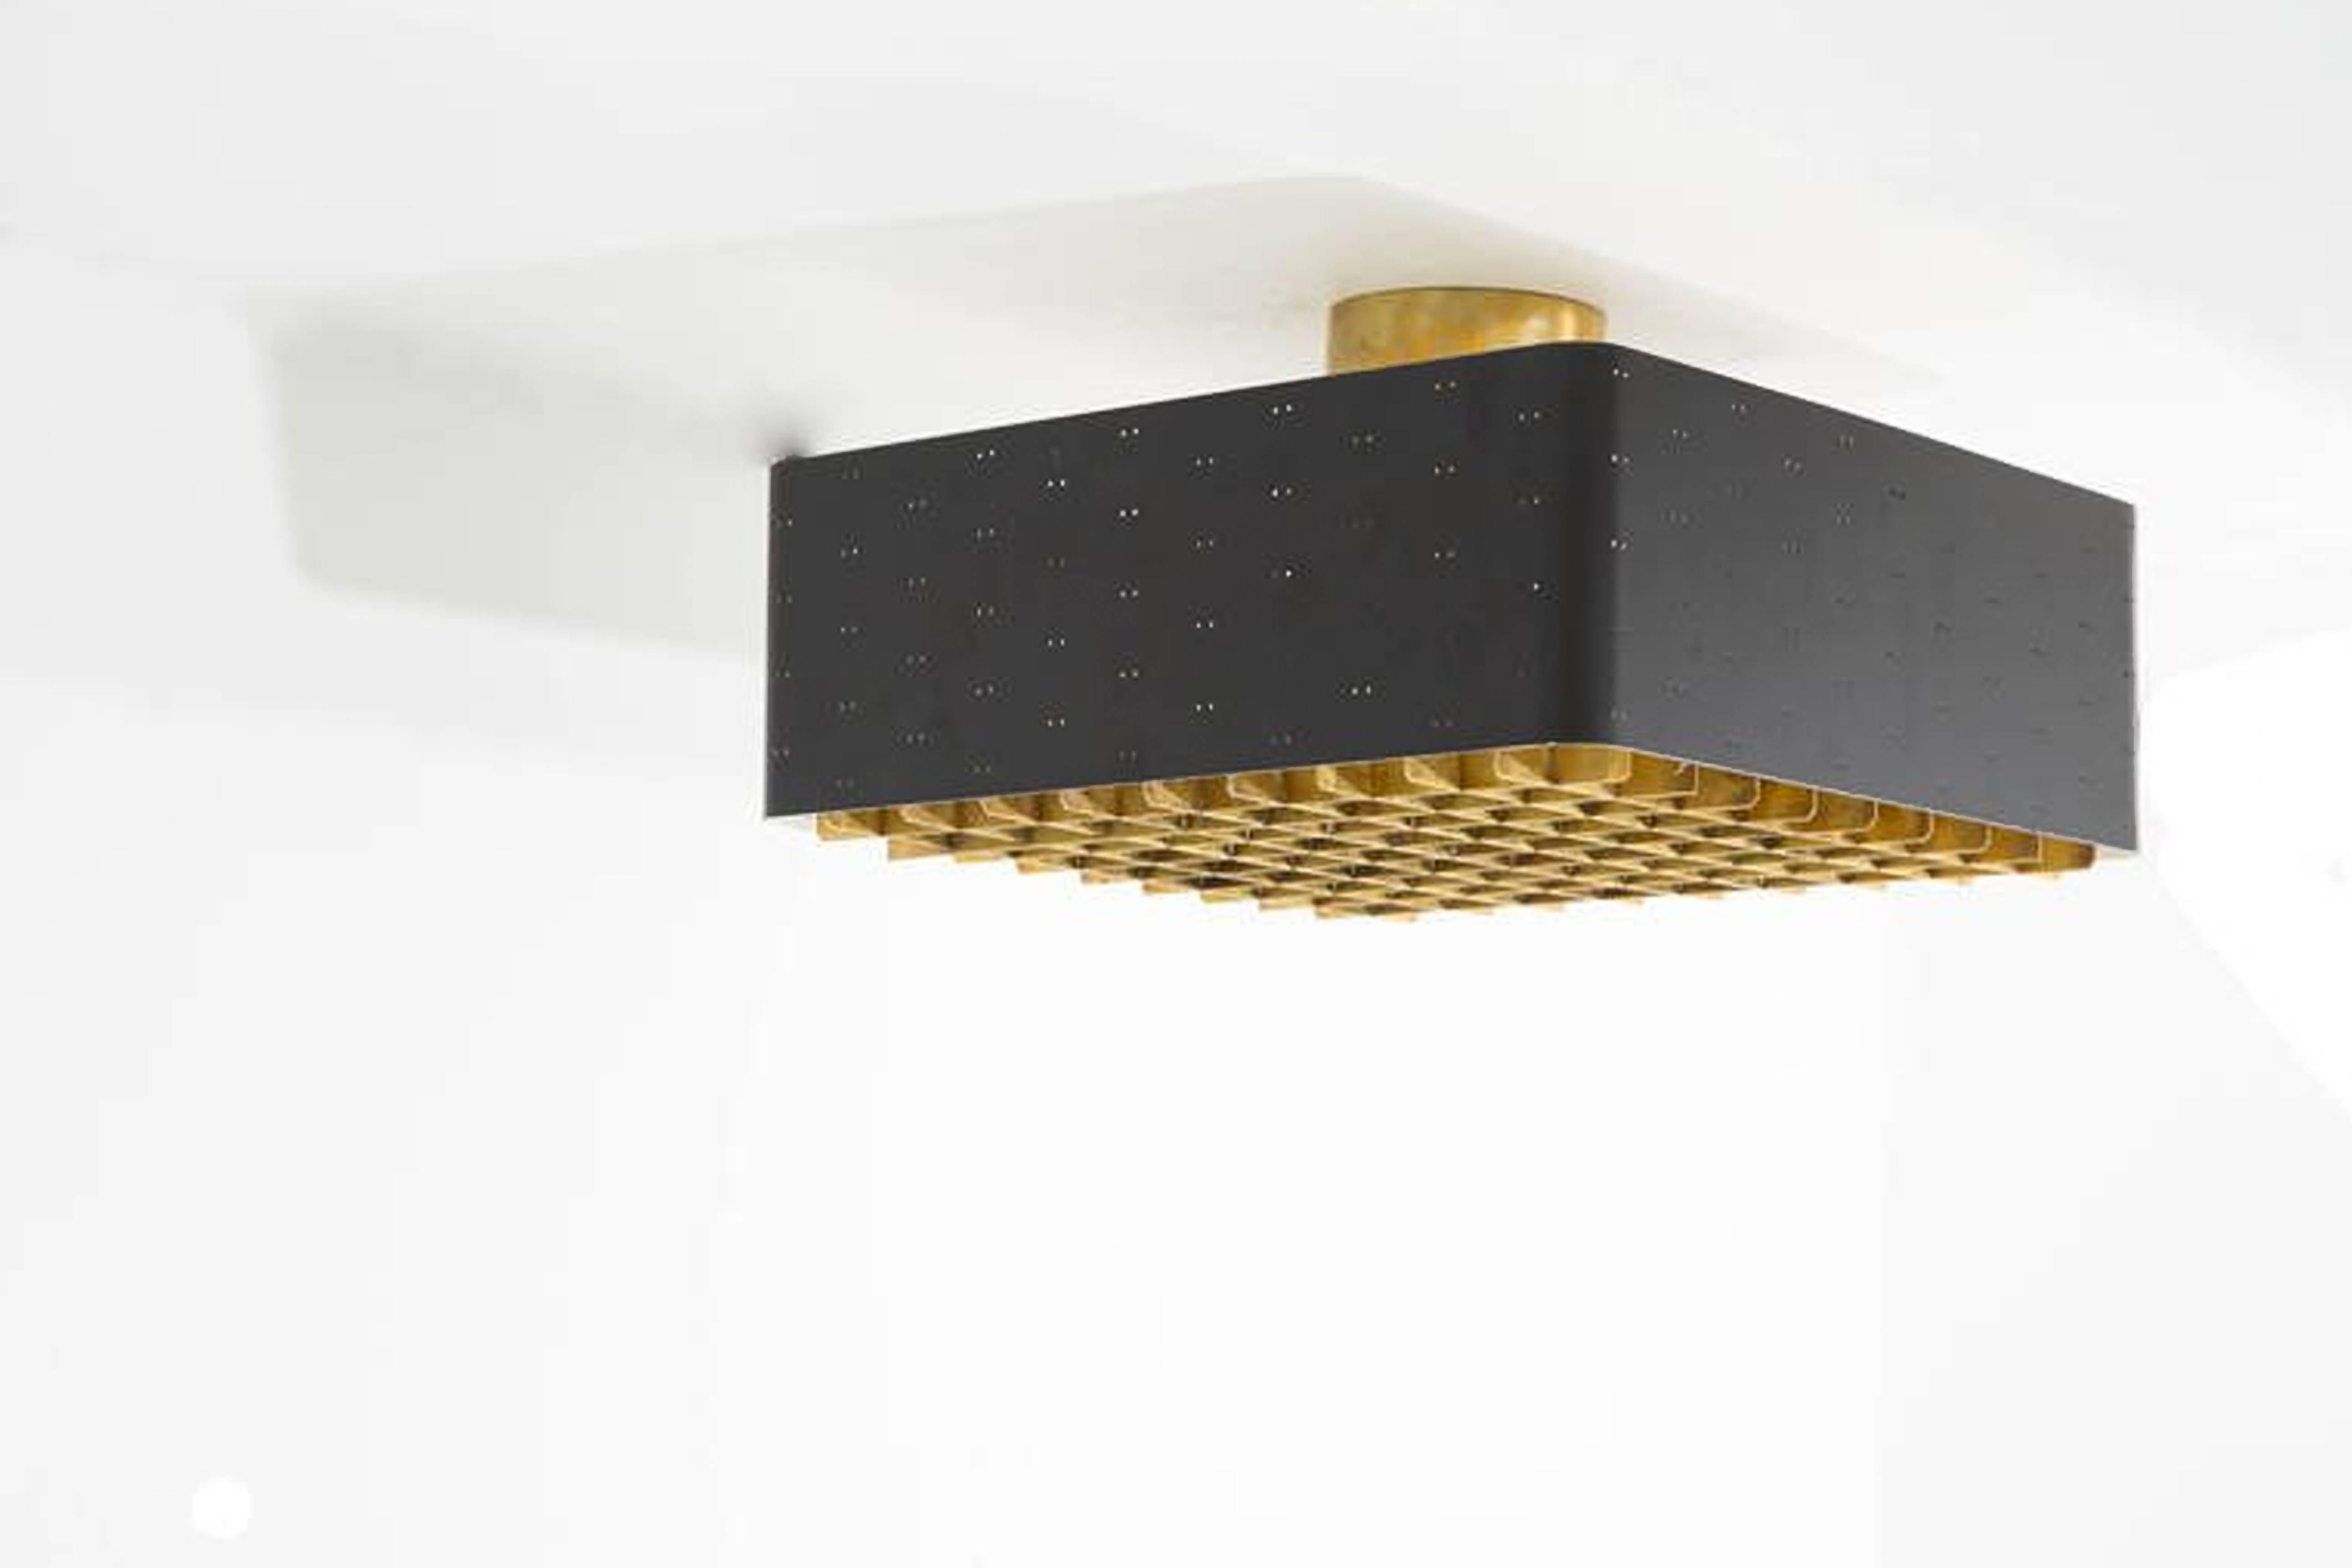 Paavo Tynell flush mount ceiling light with brass grid

Model 9068, 